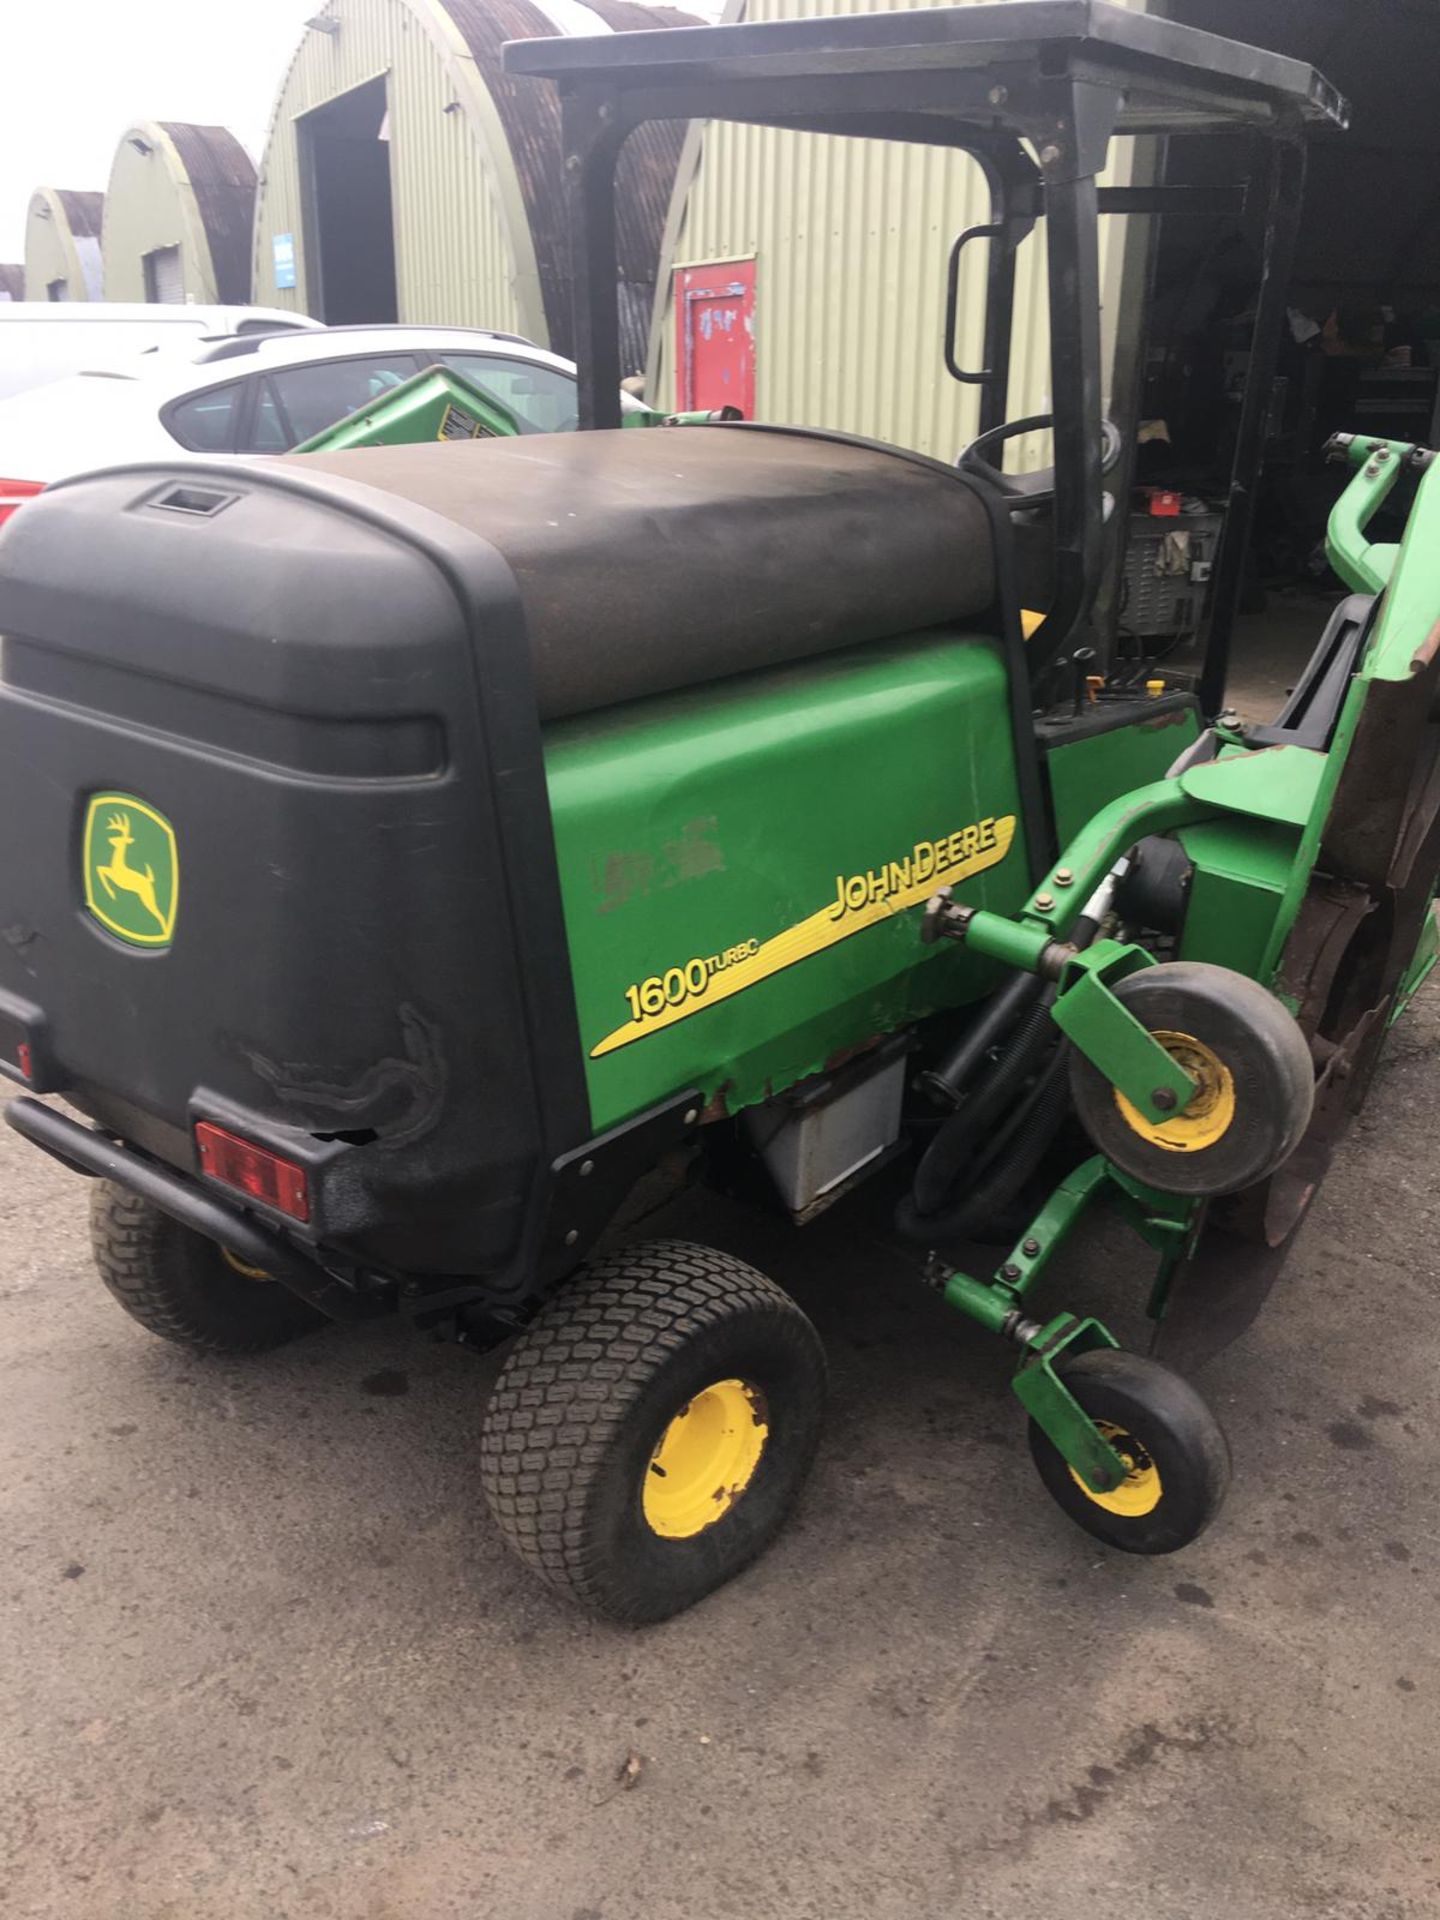 JOHN DEERE 1600 WIDE AREA TURBO BATWING RIDE ON LAWN MOWER, CRUISE CONTROL, RUNS & WORKS *NO VAT* - Image 5 of 24